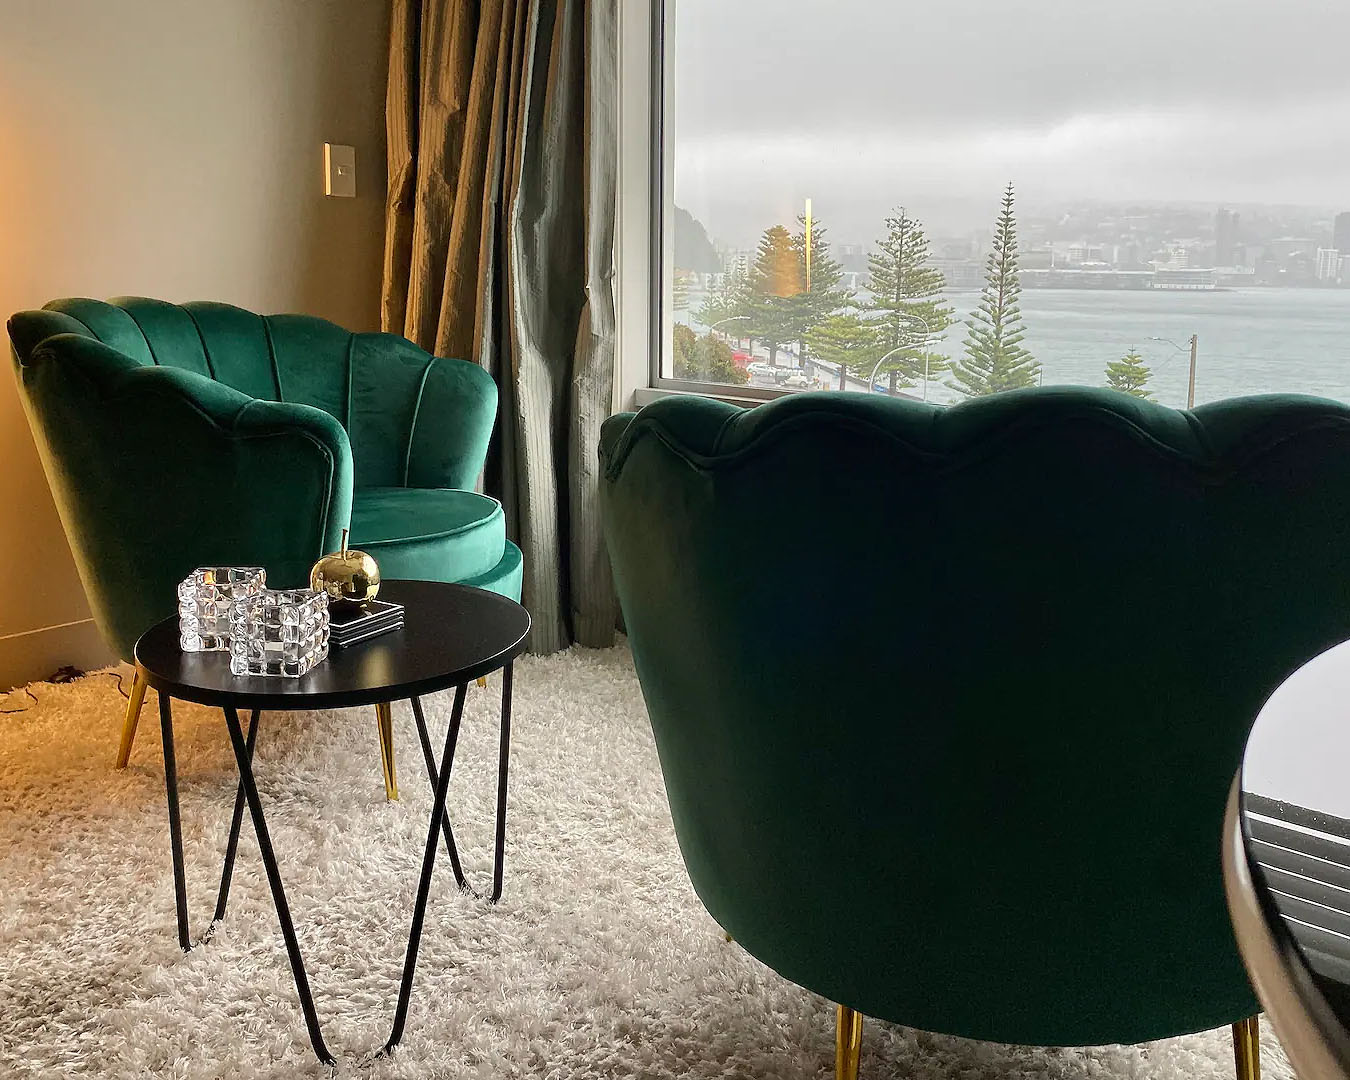 A couple of cosy chairs look out onto the sea from one of the best airbnbs in wellington.